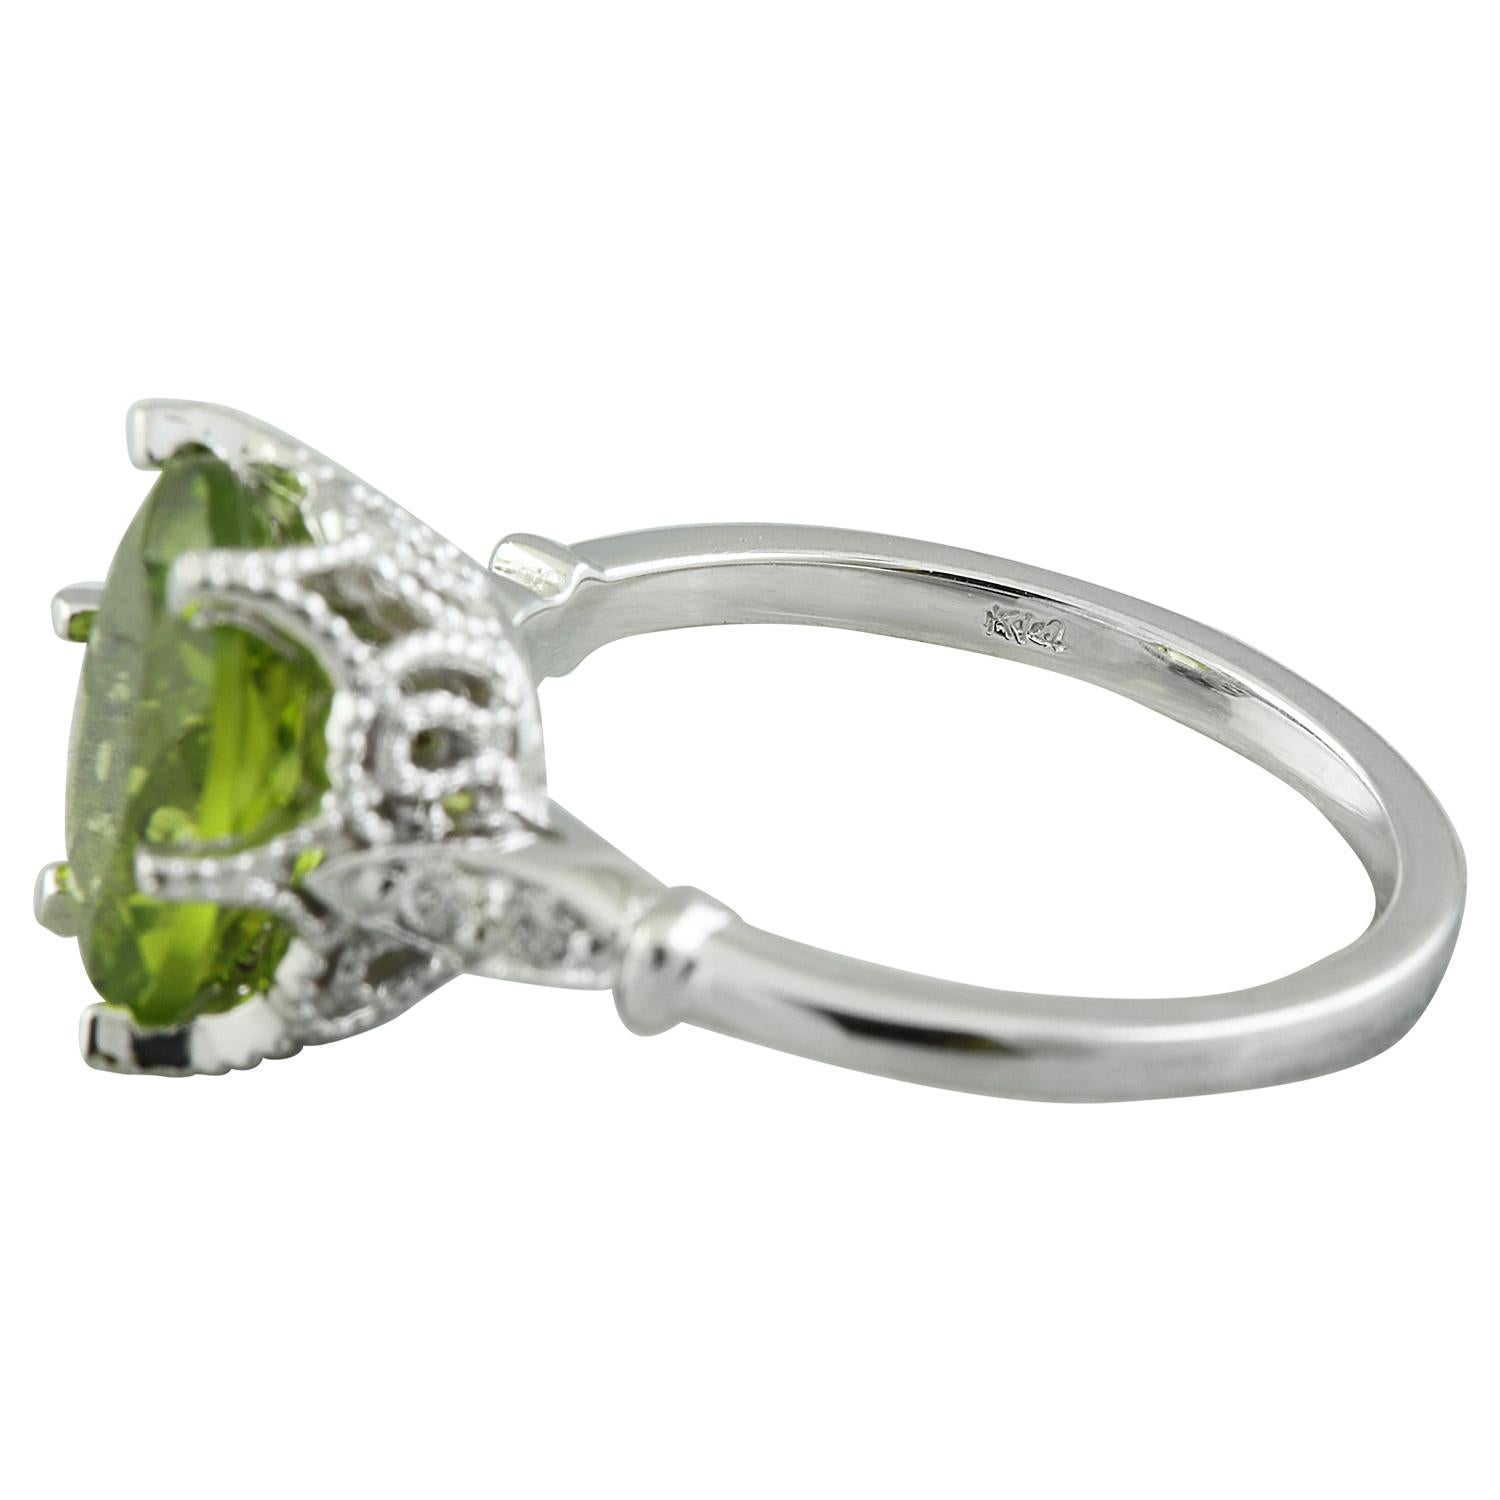 3.41 Carat Natural Peridot 14 Karat Solid White Gold Diamond Ring
Stamped: 14K 
Total Ring Weight: 4.2 Grams 
Peridot Weight: 3.26 Carat (11.00x9.00 Millimeters)  
Diamond Weight: 0.15 carat (F-G Color, VS2-SI1 Clarity )
Quantity: 4
Face Measures: